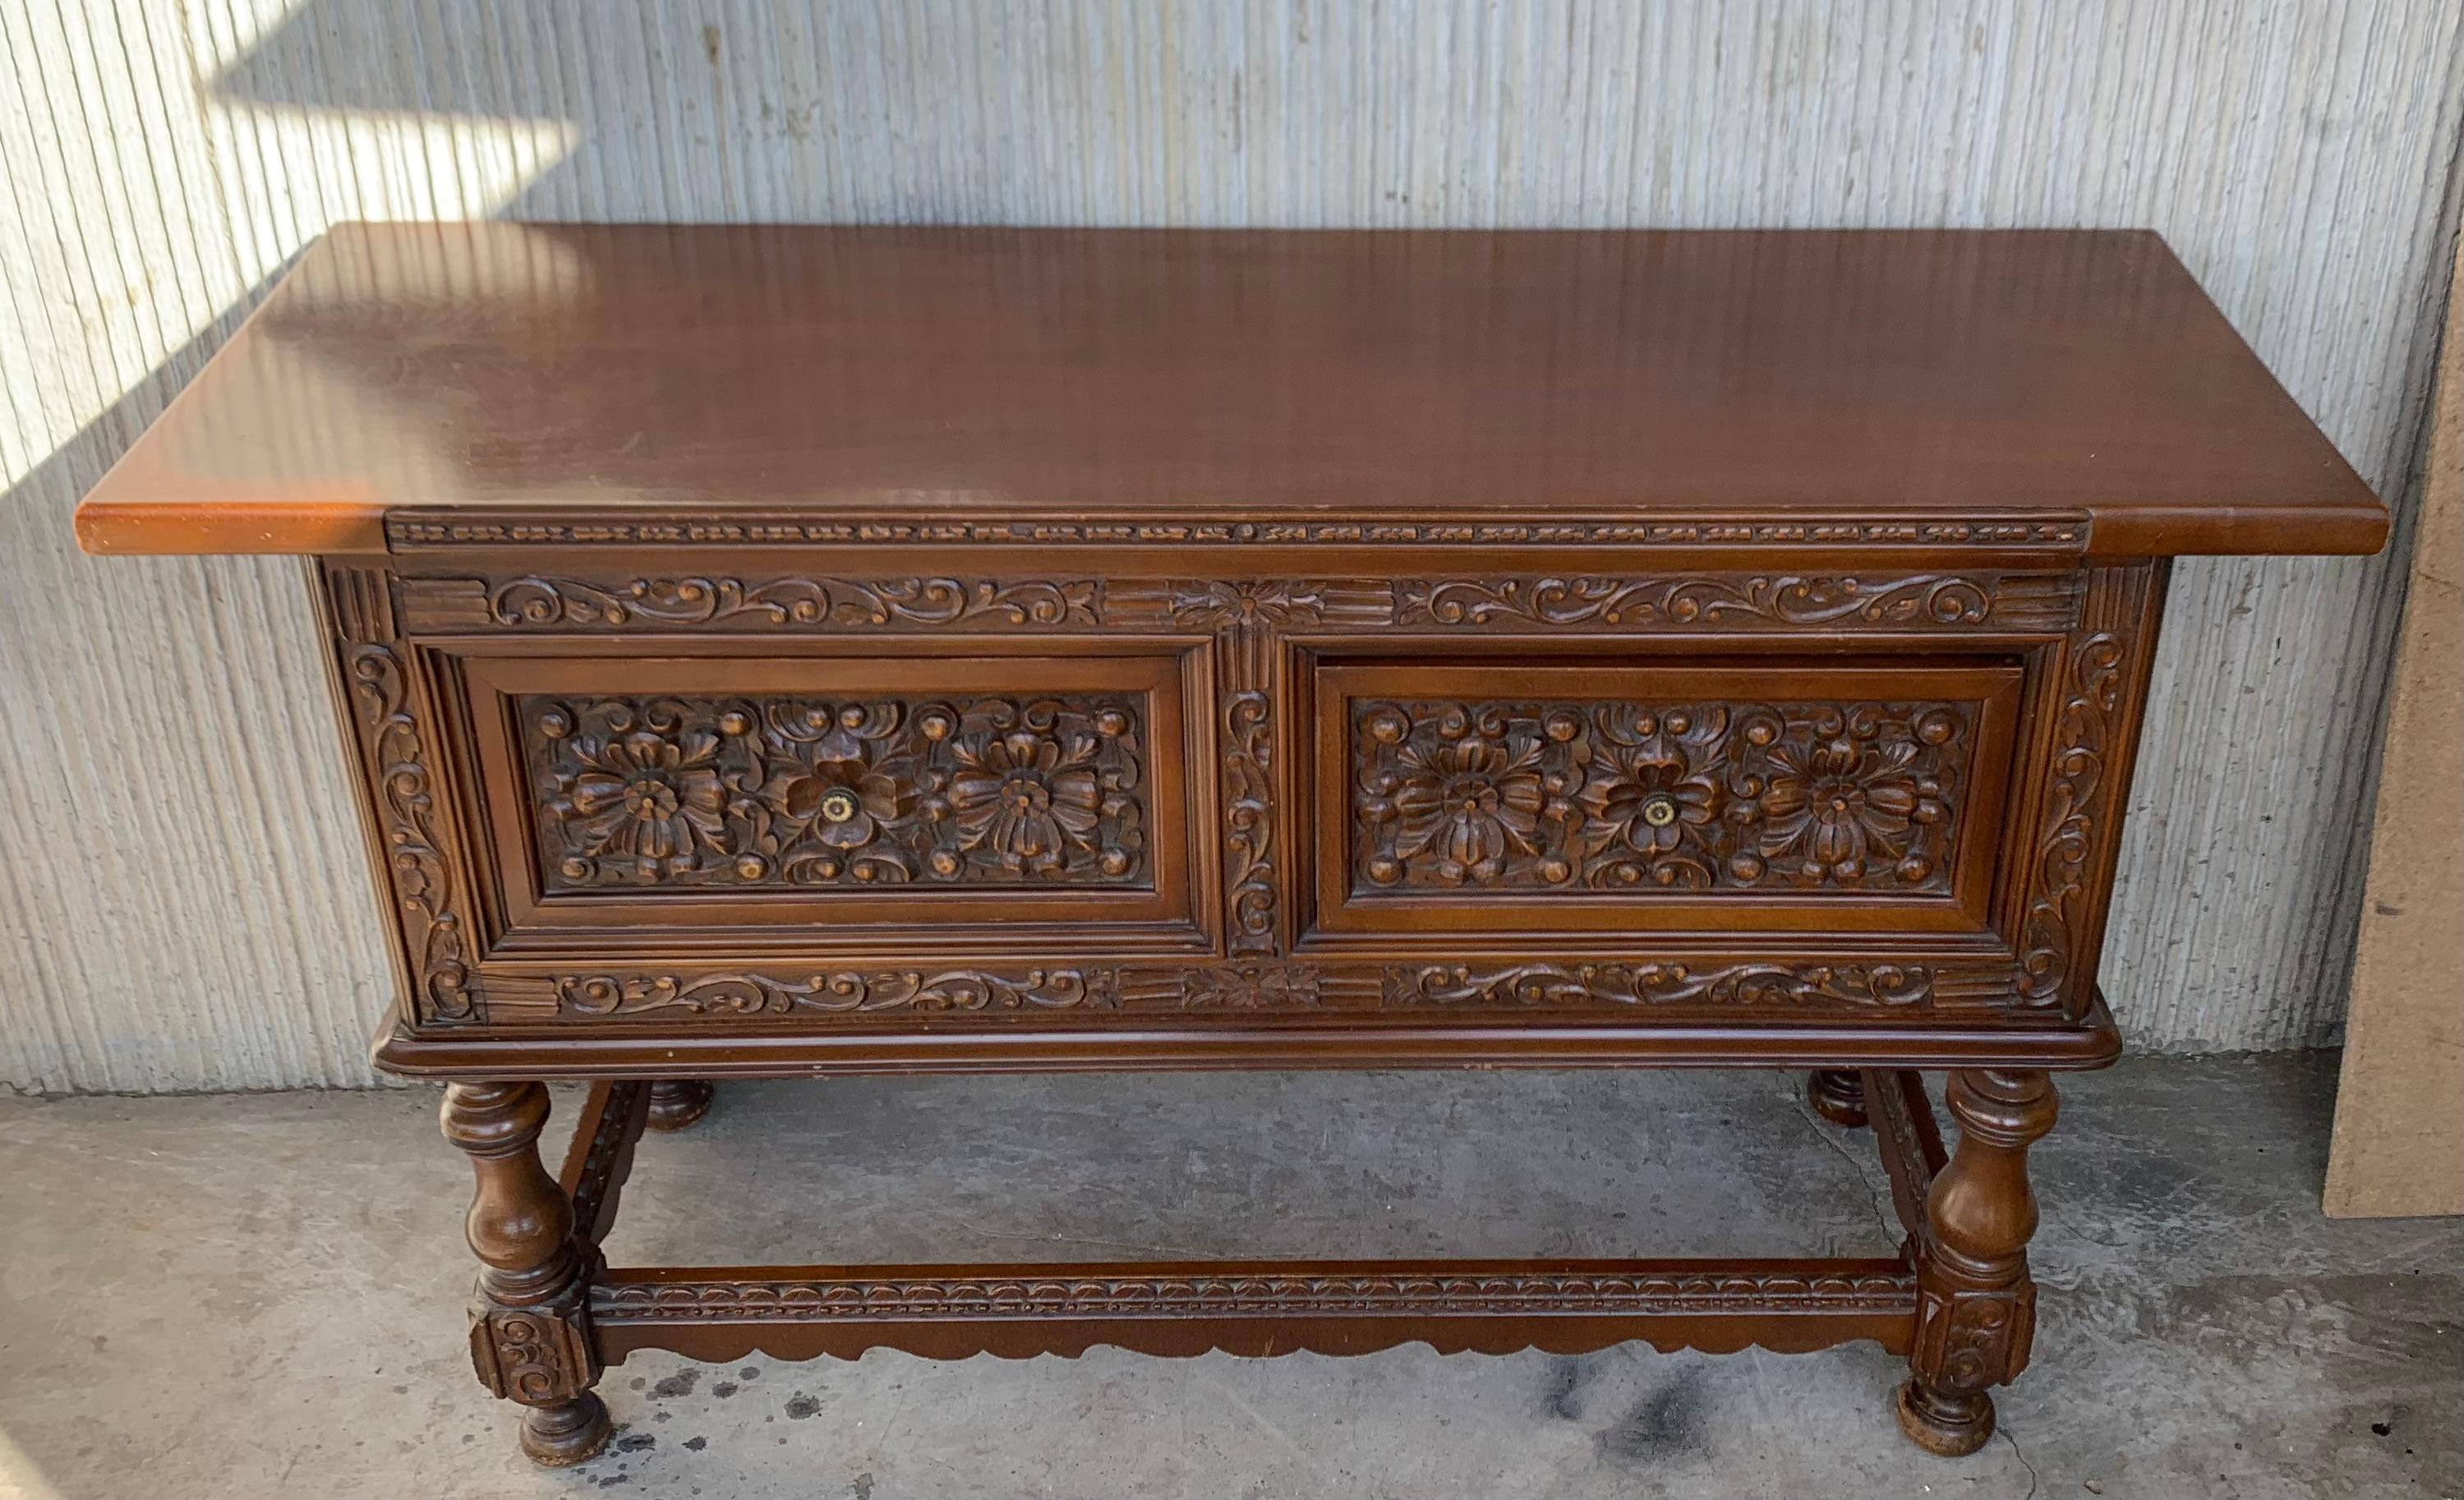 This large Spanish early 20th century features a beautiful one plank rectangular top over two wide carved drawers. Each drawer, featuring slightly different hardware, is adorned with floral motifs. Rosettes are carved between the drawers and each